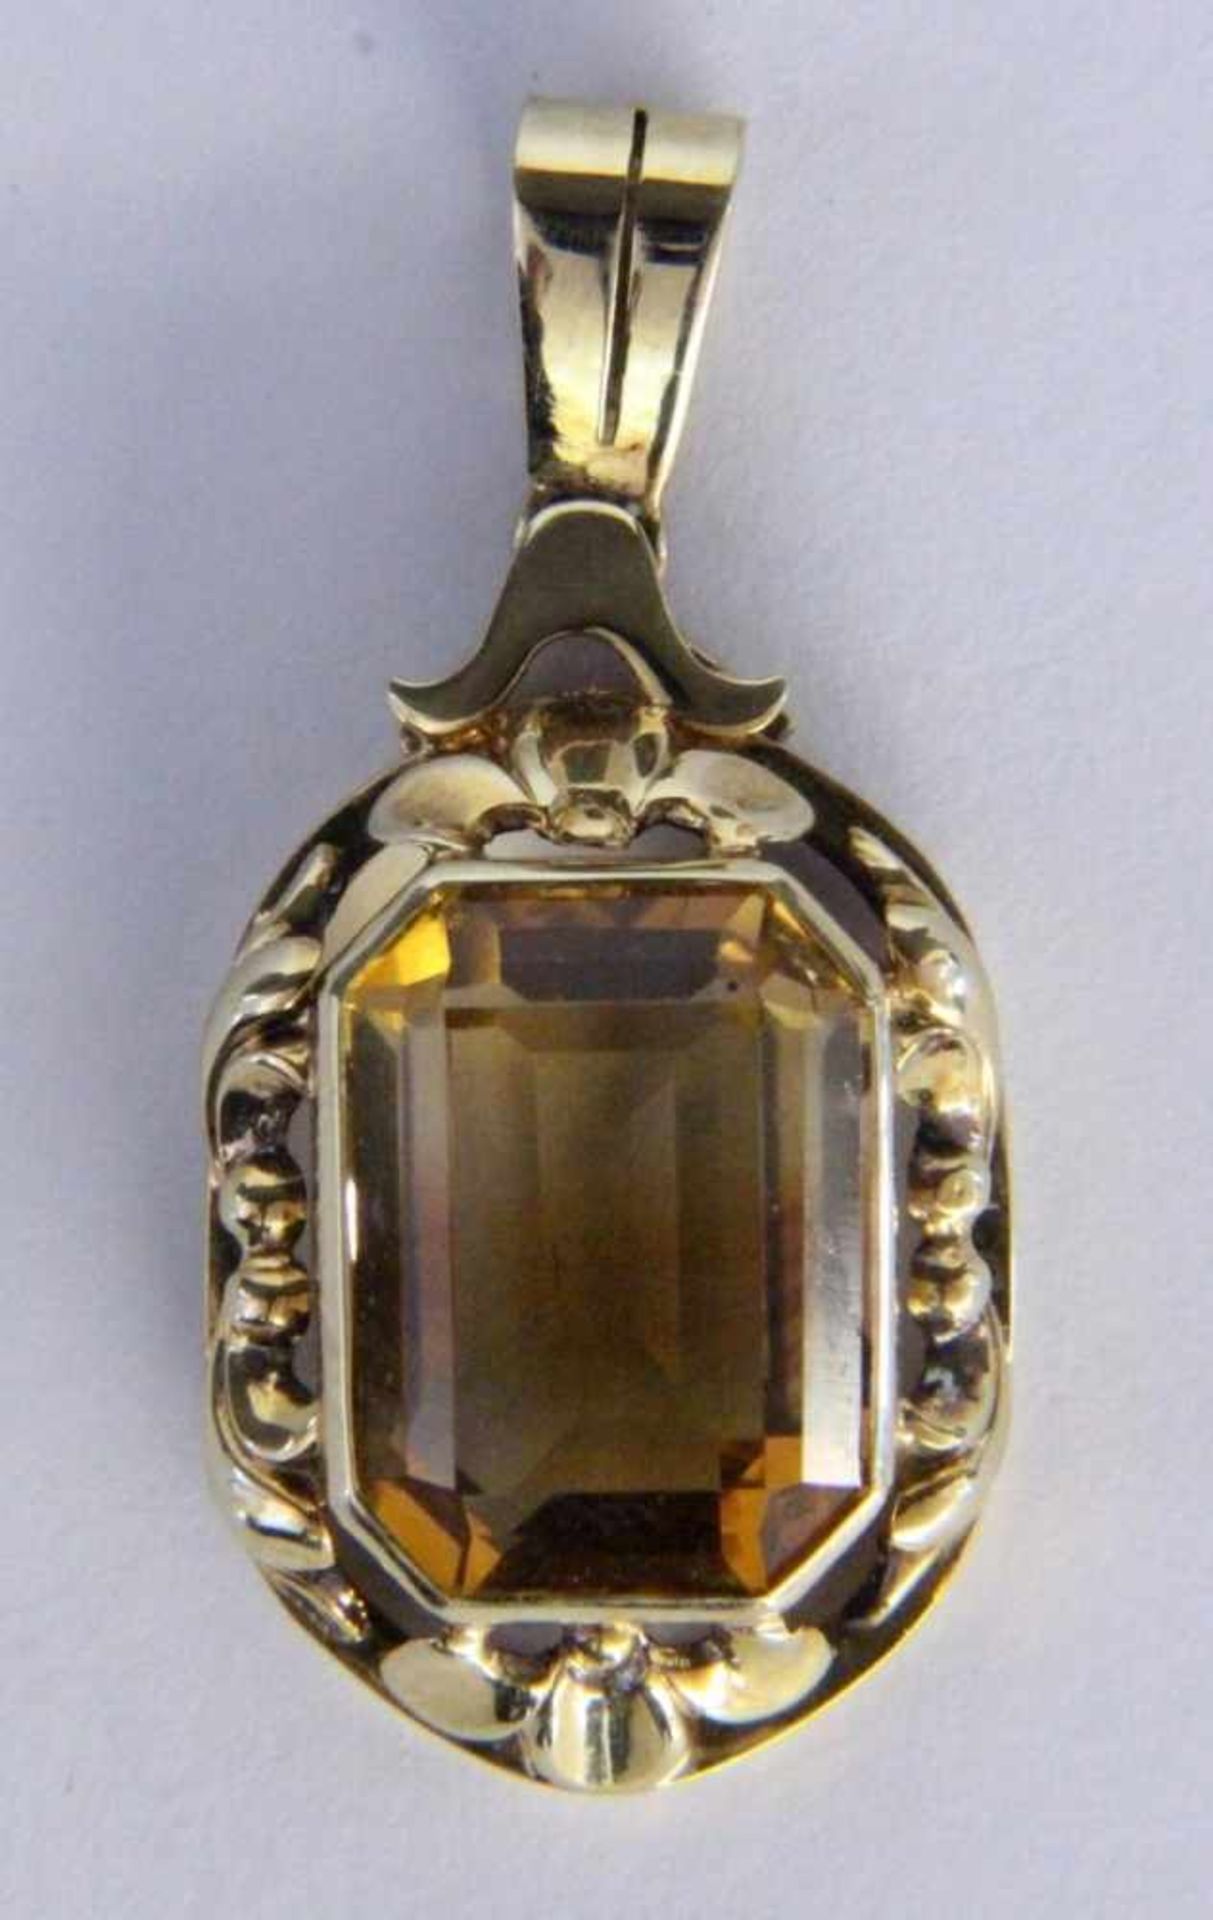 A PENDANT 585/000 yellow gold with citrine. 4 cm long, gross weight approximately 6.